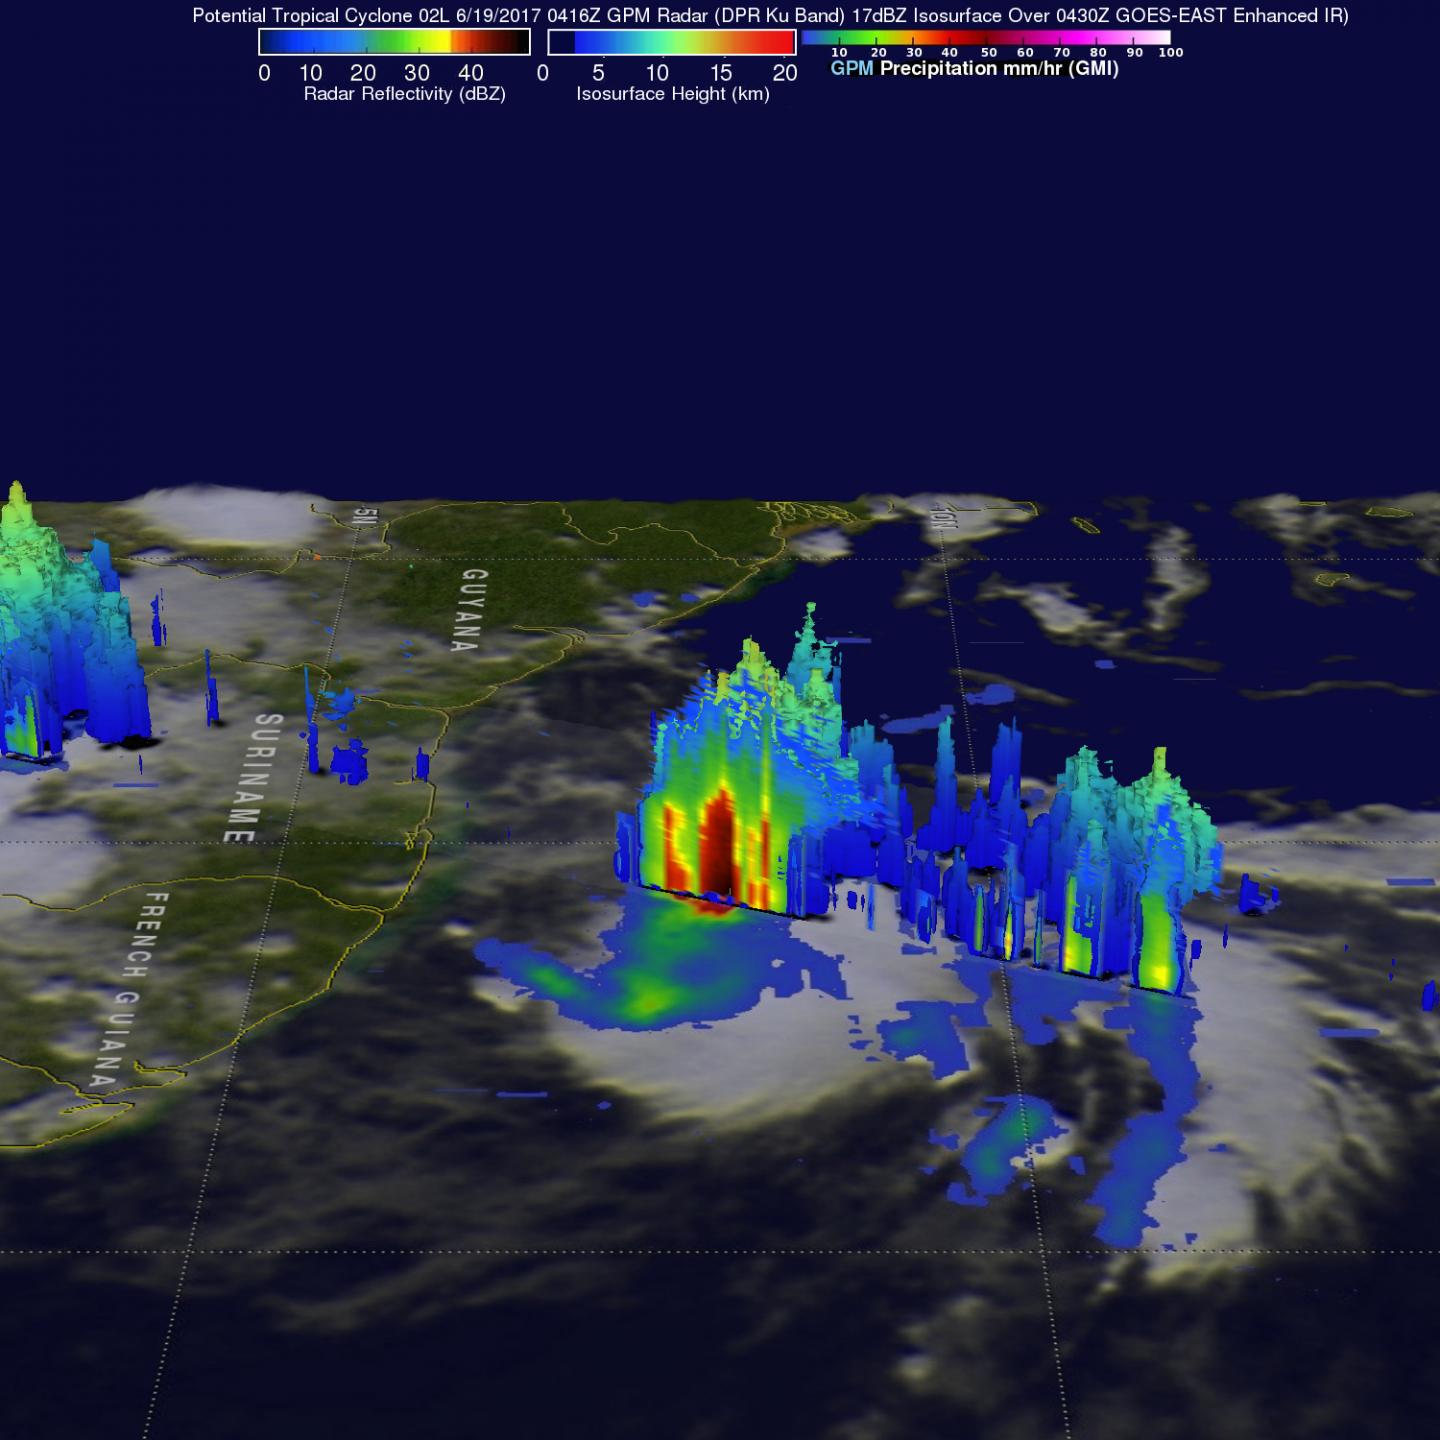 GPM 3-D Image of TD2